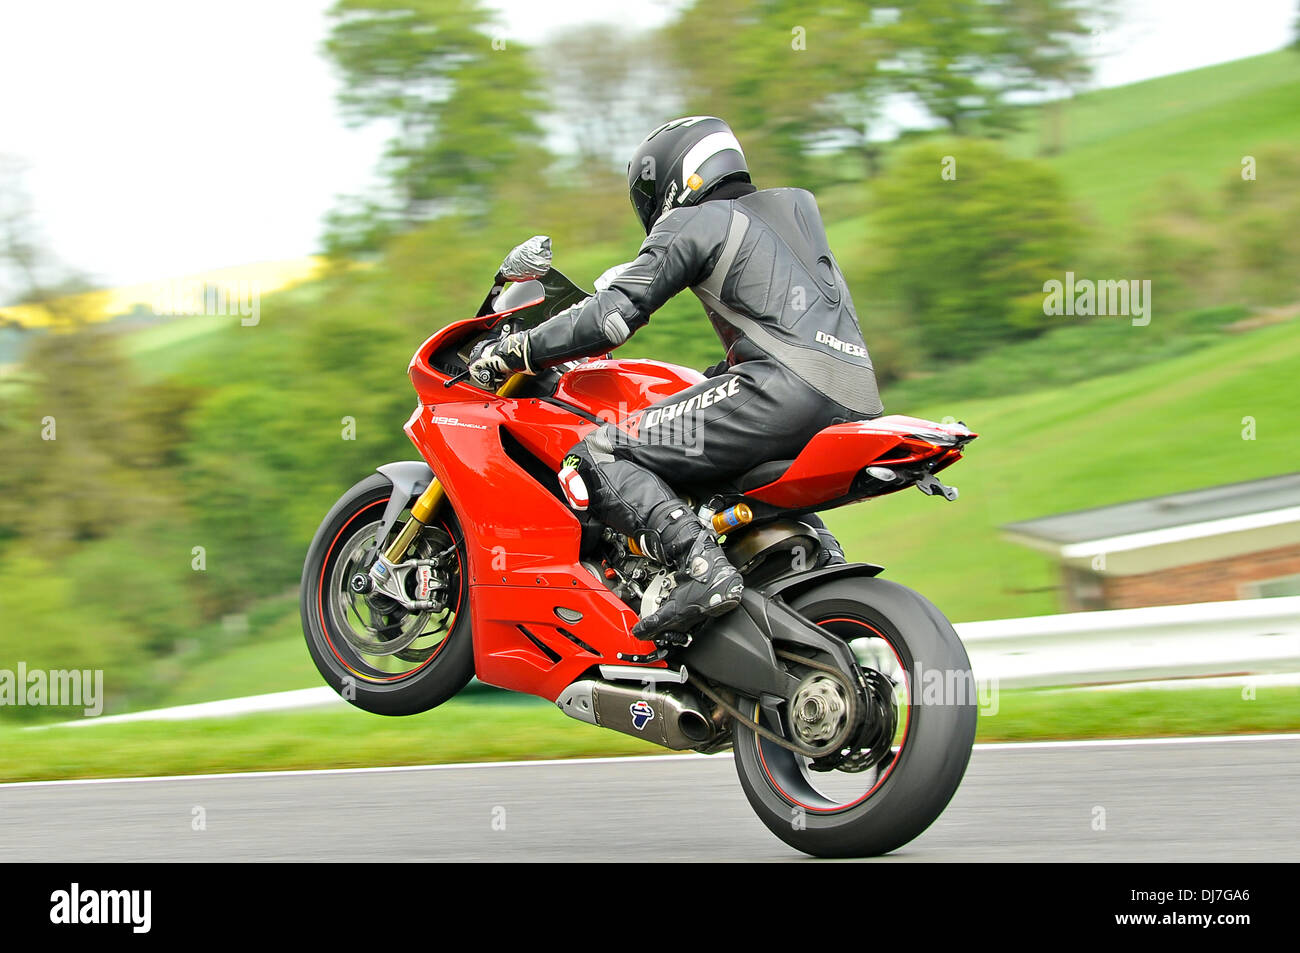 Motorcycle pulling a wheelie Stock Photo